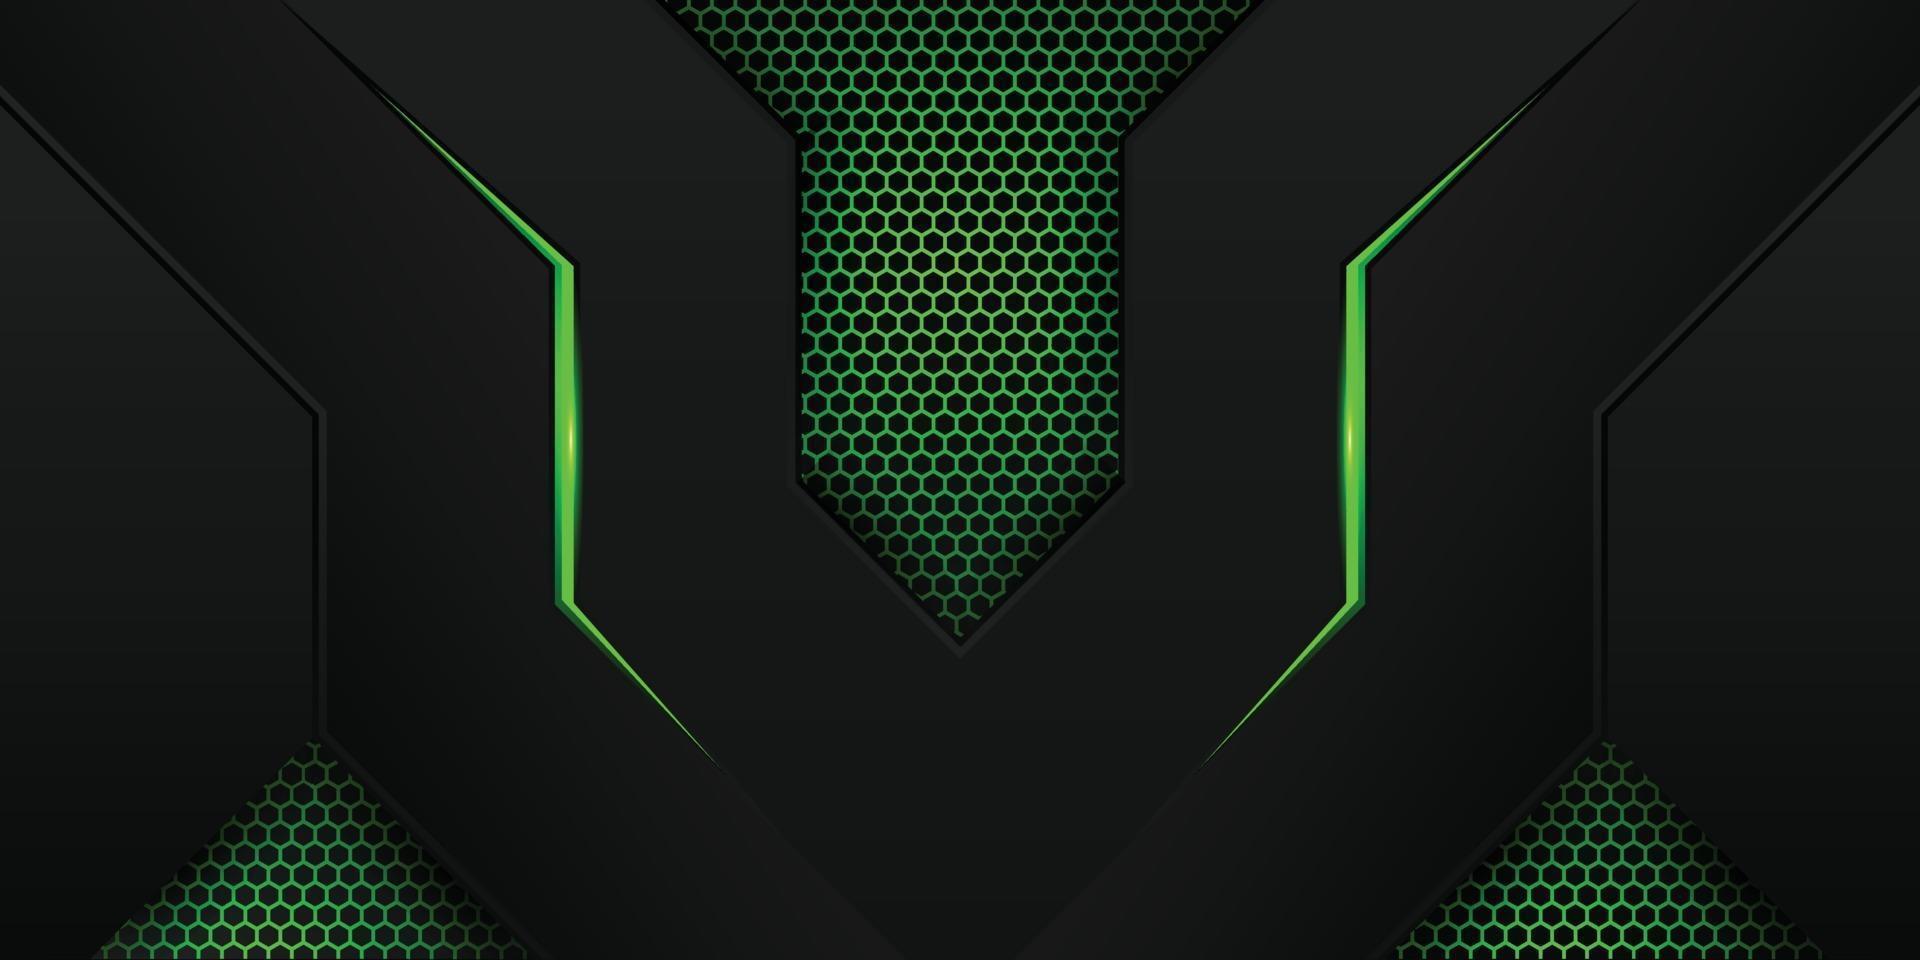 modern green gaming background with hexagon pattern vector